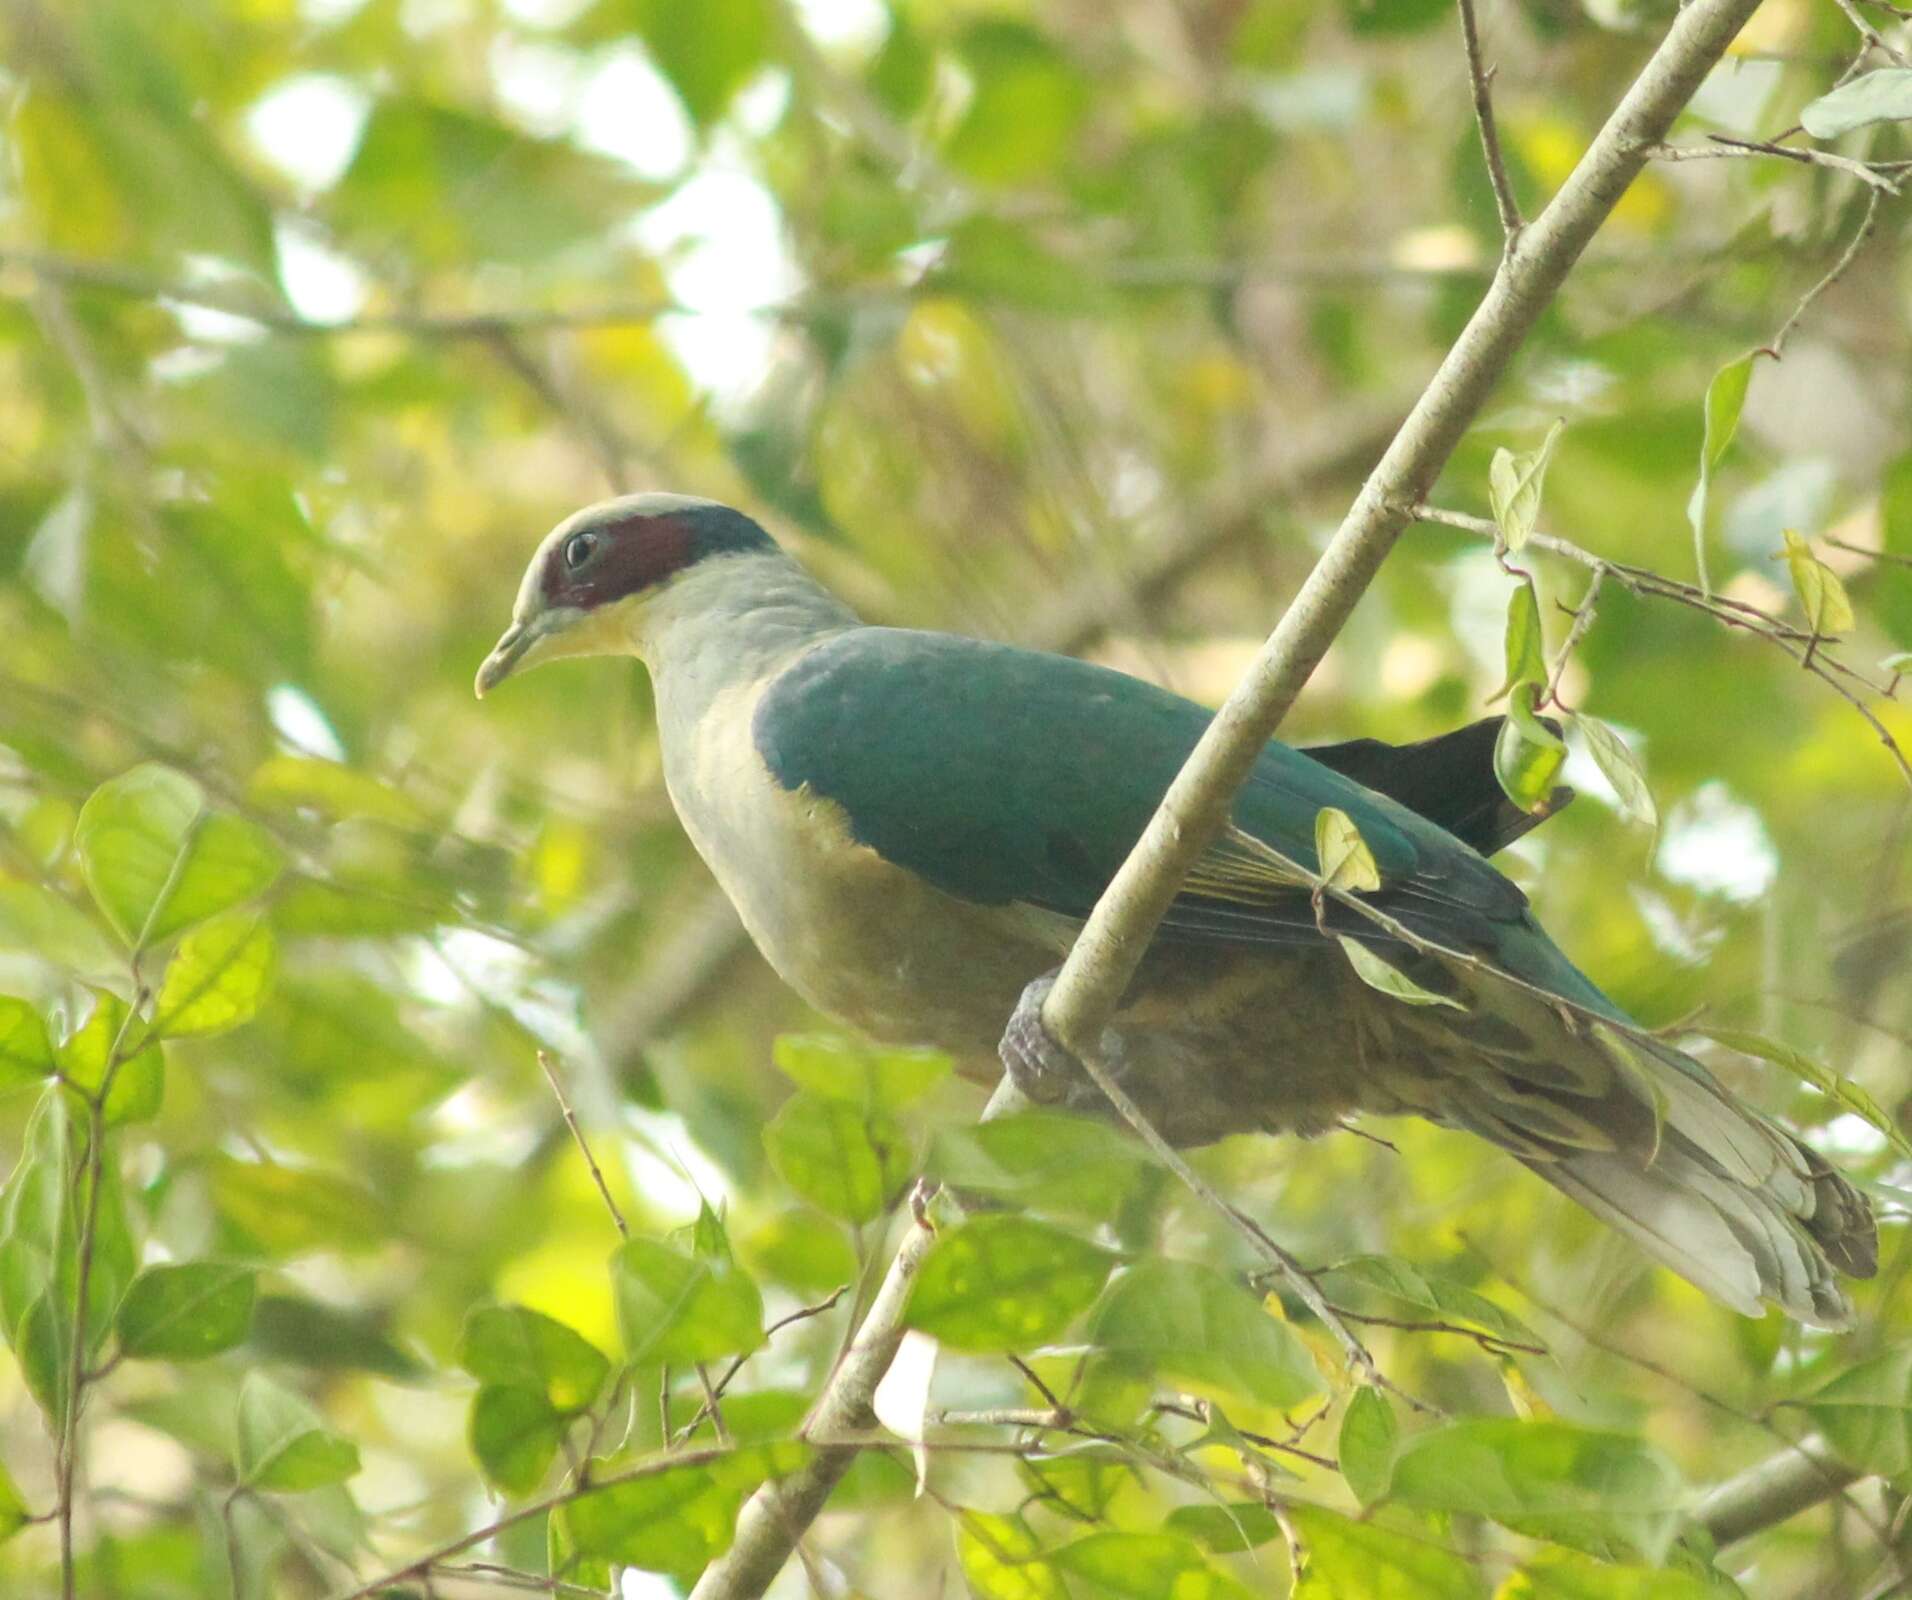 Image of red-eared fruit dove